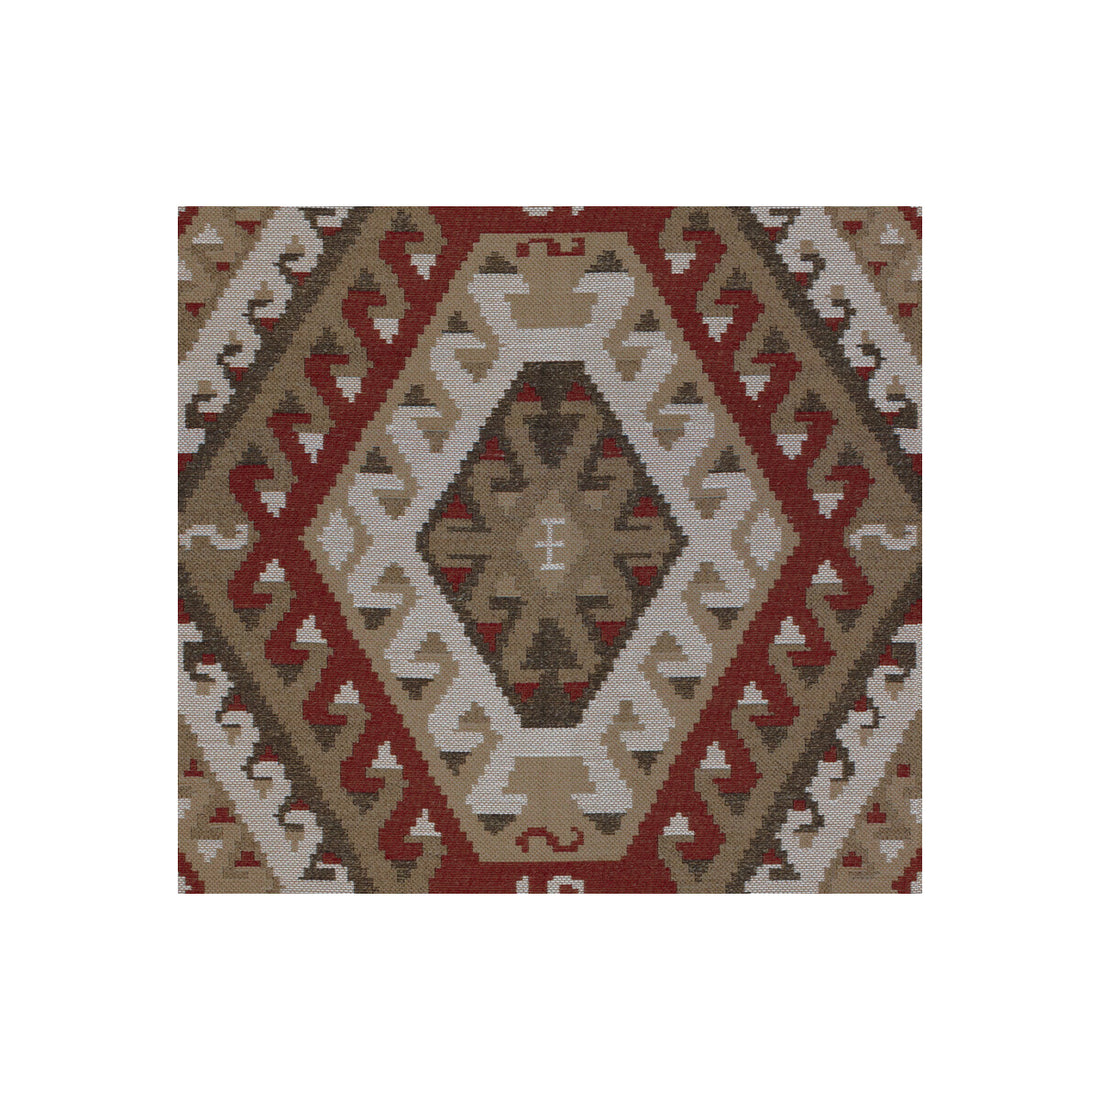 Rustic Kilim fabric in sundried red color - pattern 32347.619.0 - by Kravet Couture in the Nomad Chic collection